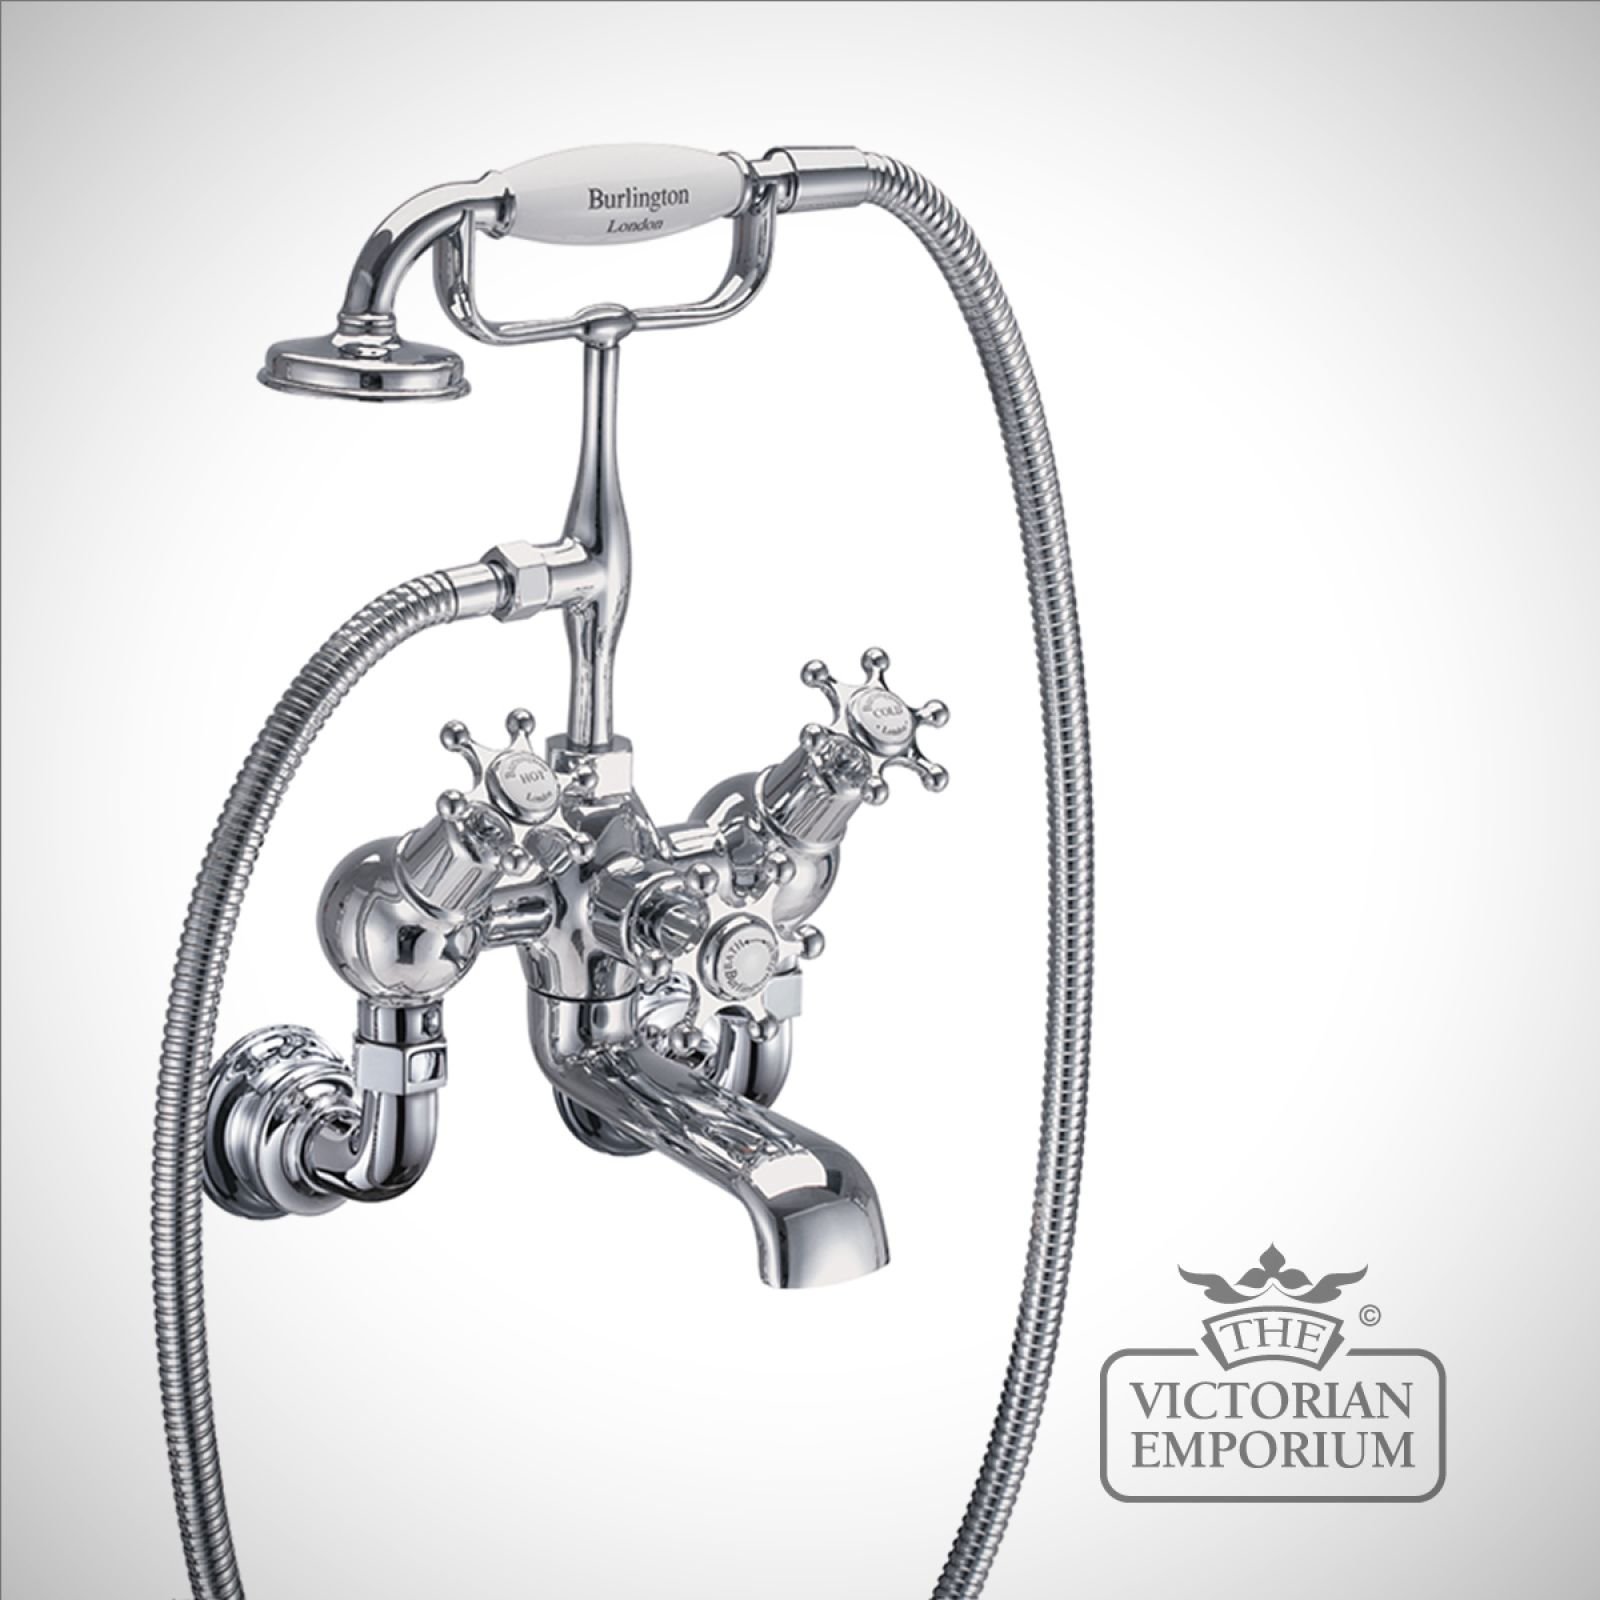 Liverpool Regent Angled Wall mounted bath and shower mixer